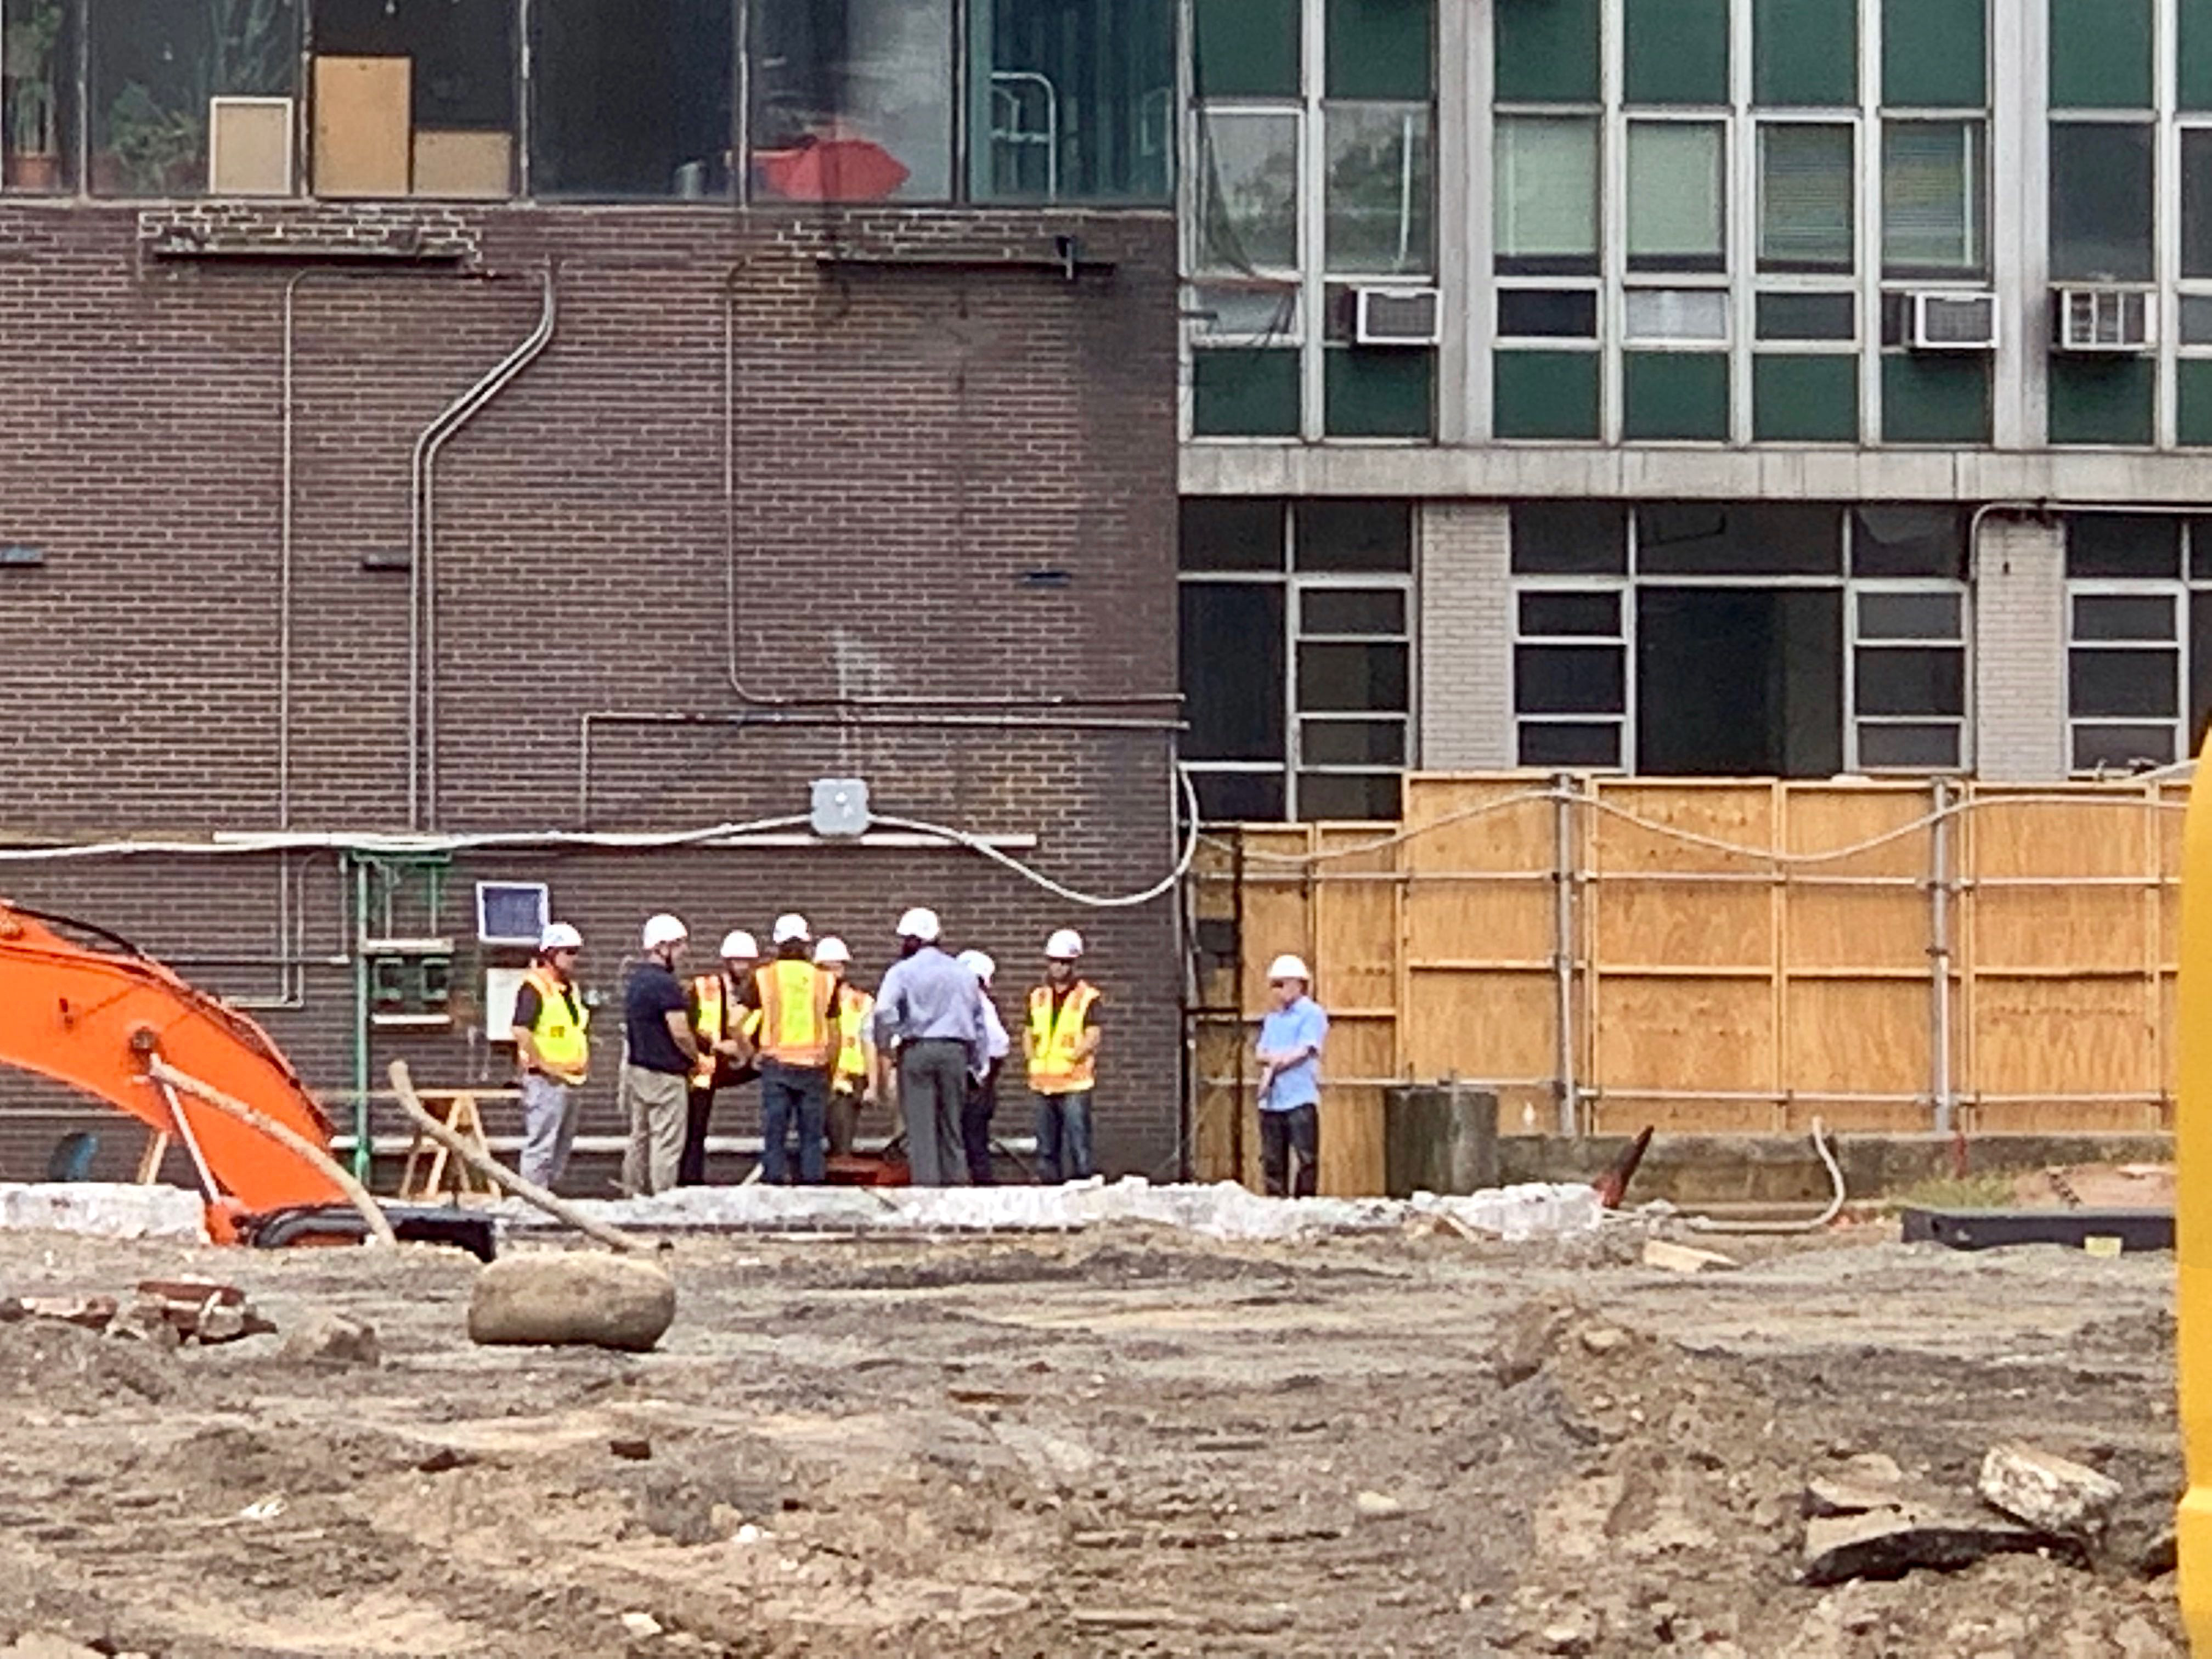 Inspectors gathered on Friday morning to discuss the damage at the site of Thursday’s explosion. Work on the 34-story building is halted. Eagle photo by Mary Frost